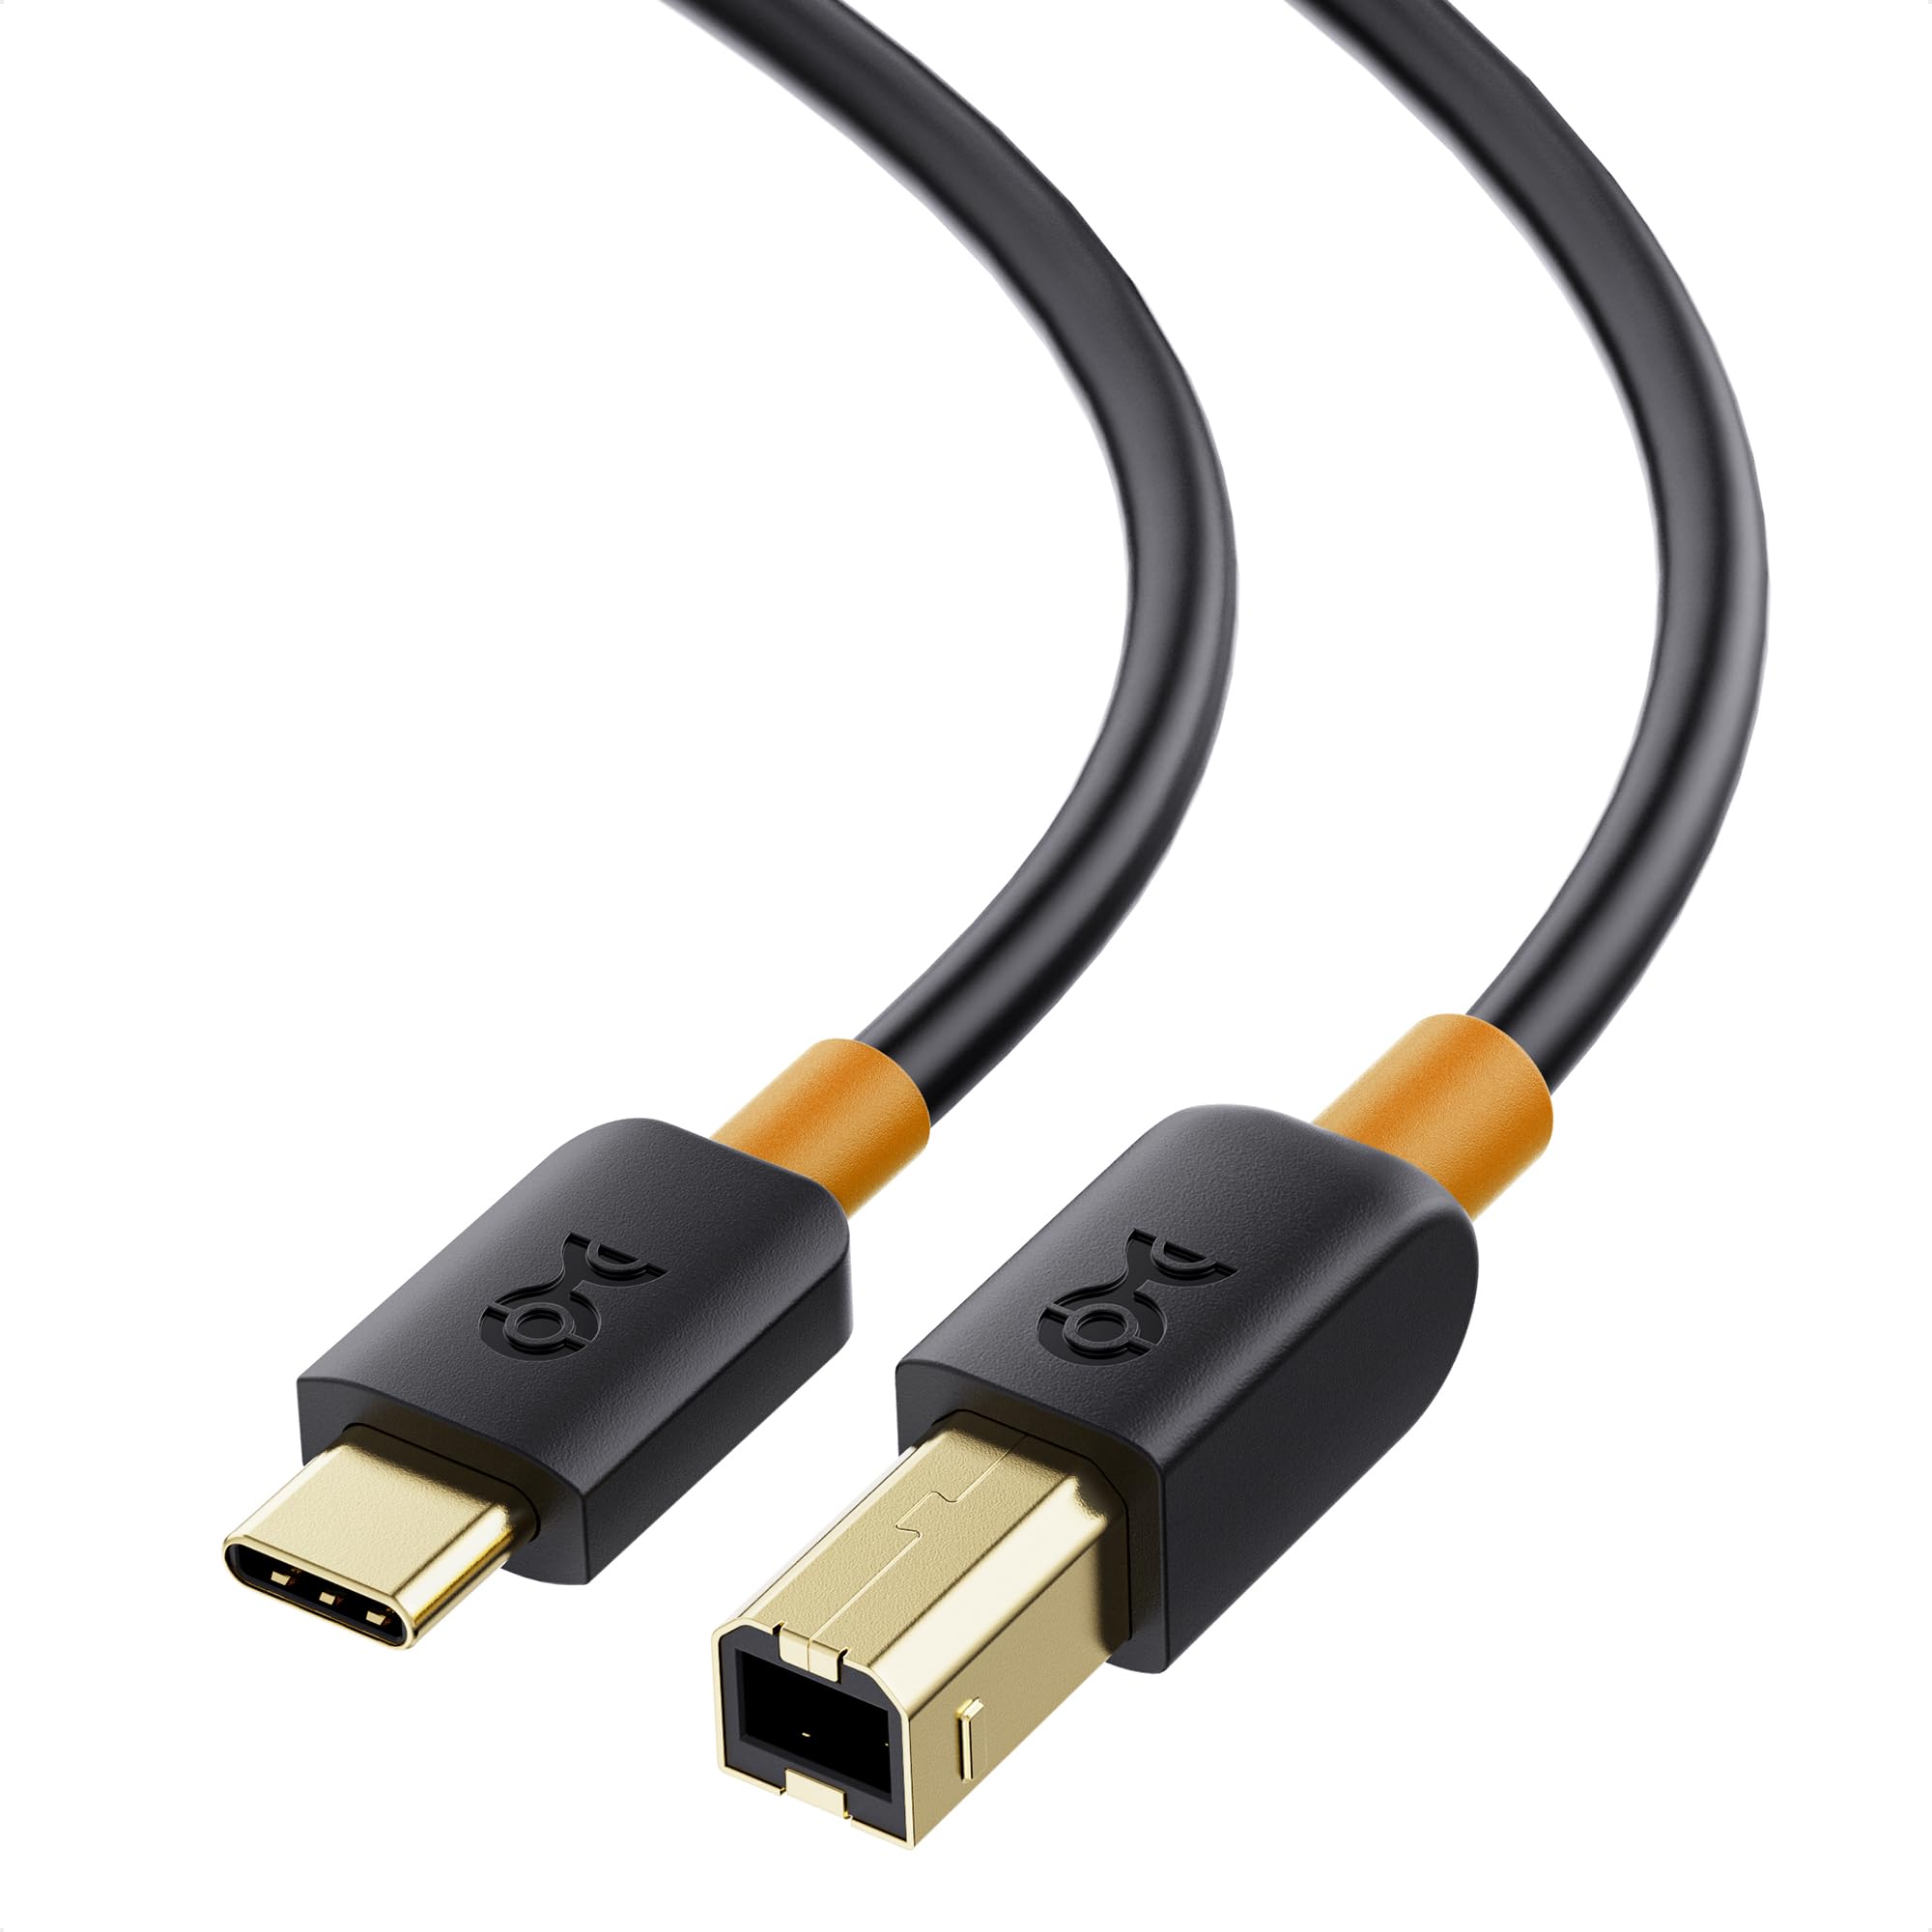 Try using a different USB cable to connect your iPad to the computer.
Connect the USB cable to a different USB port on the computer.